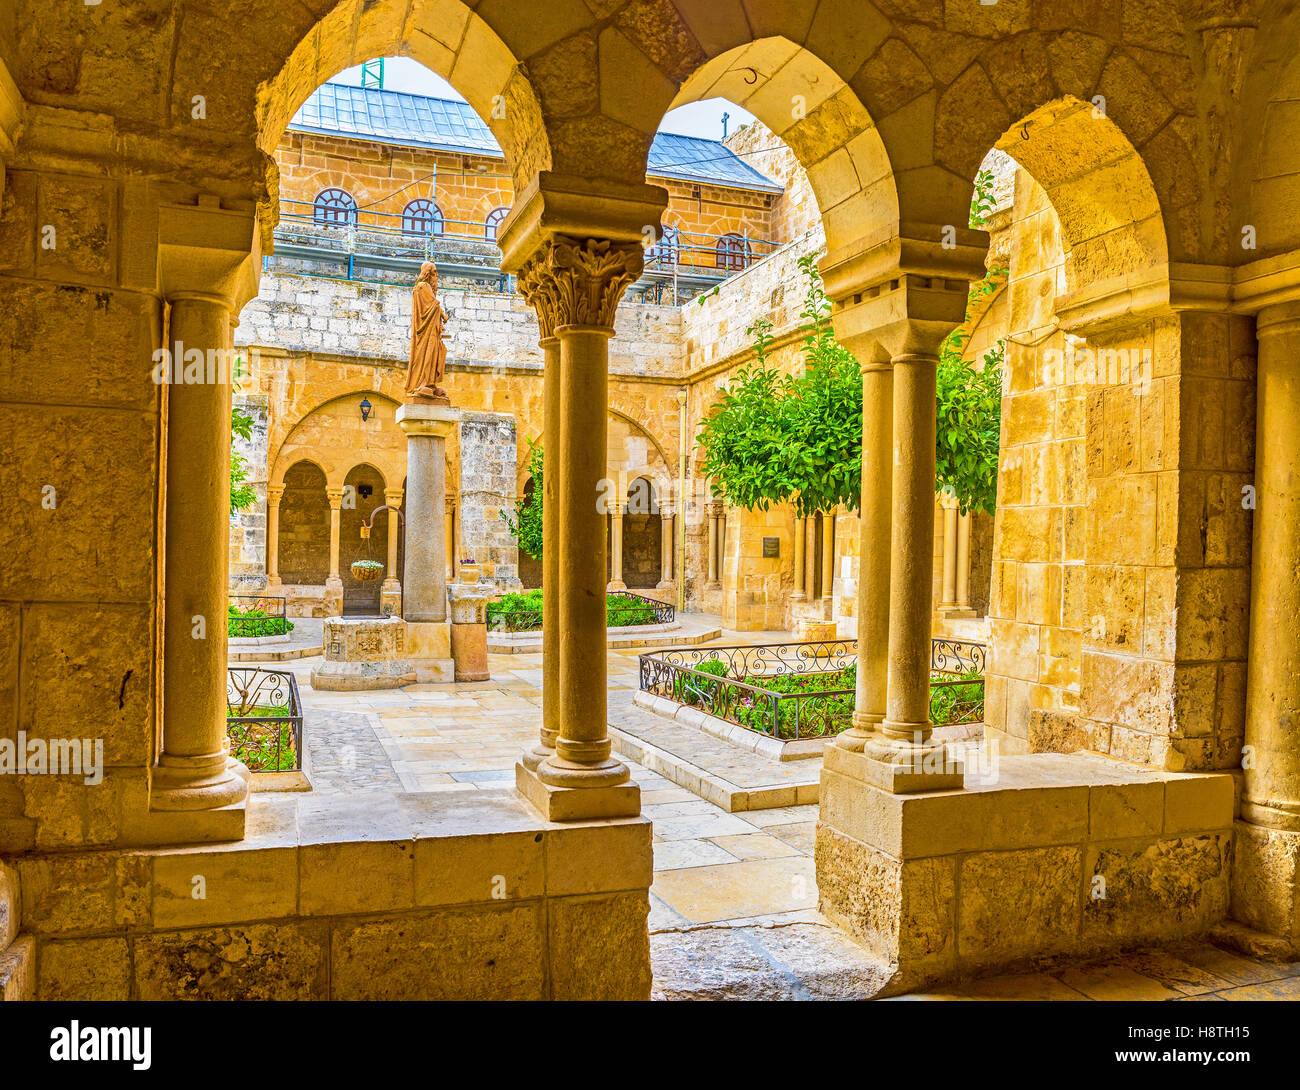 The view of the Franciscan courtyard with the St. Jerome statue in the middle Stock Photo